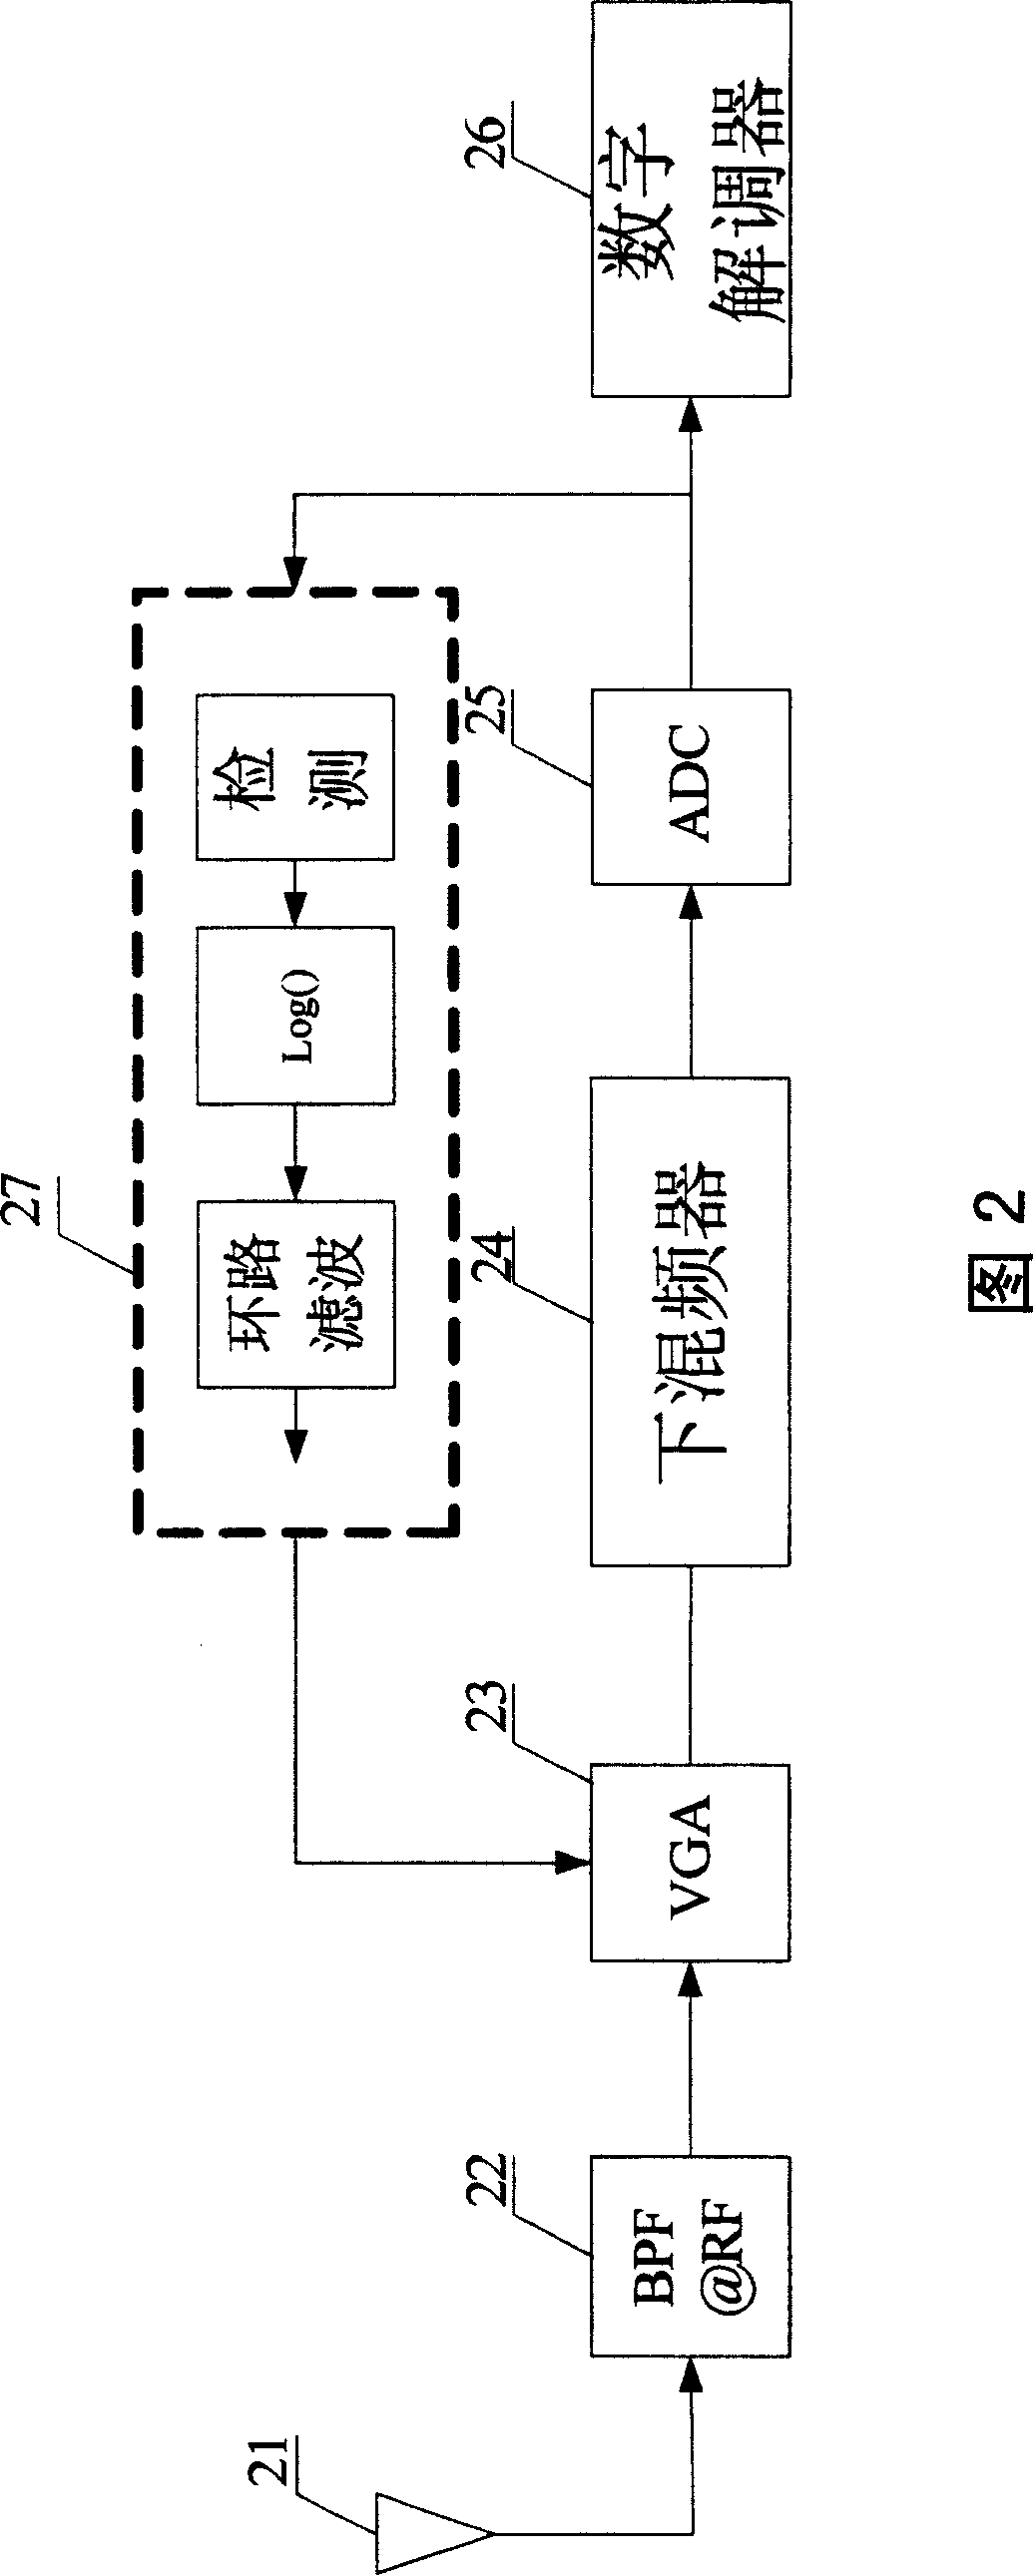 Specific lookup table based digital automatic gain control device